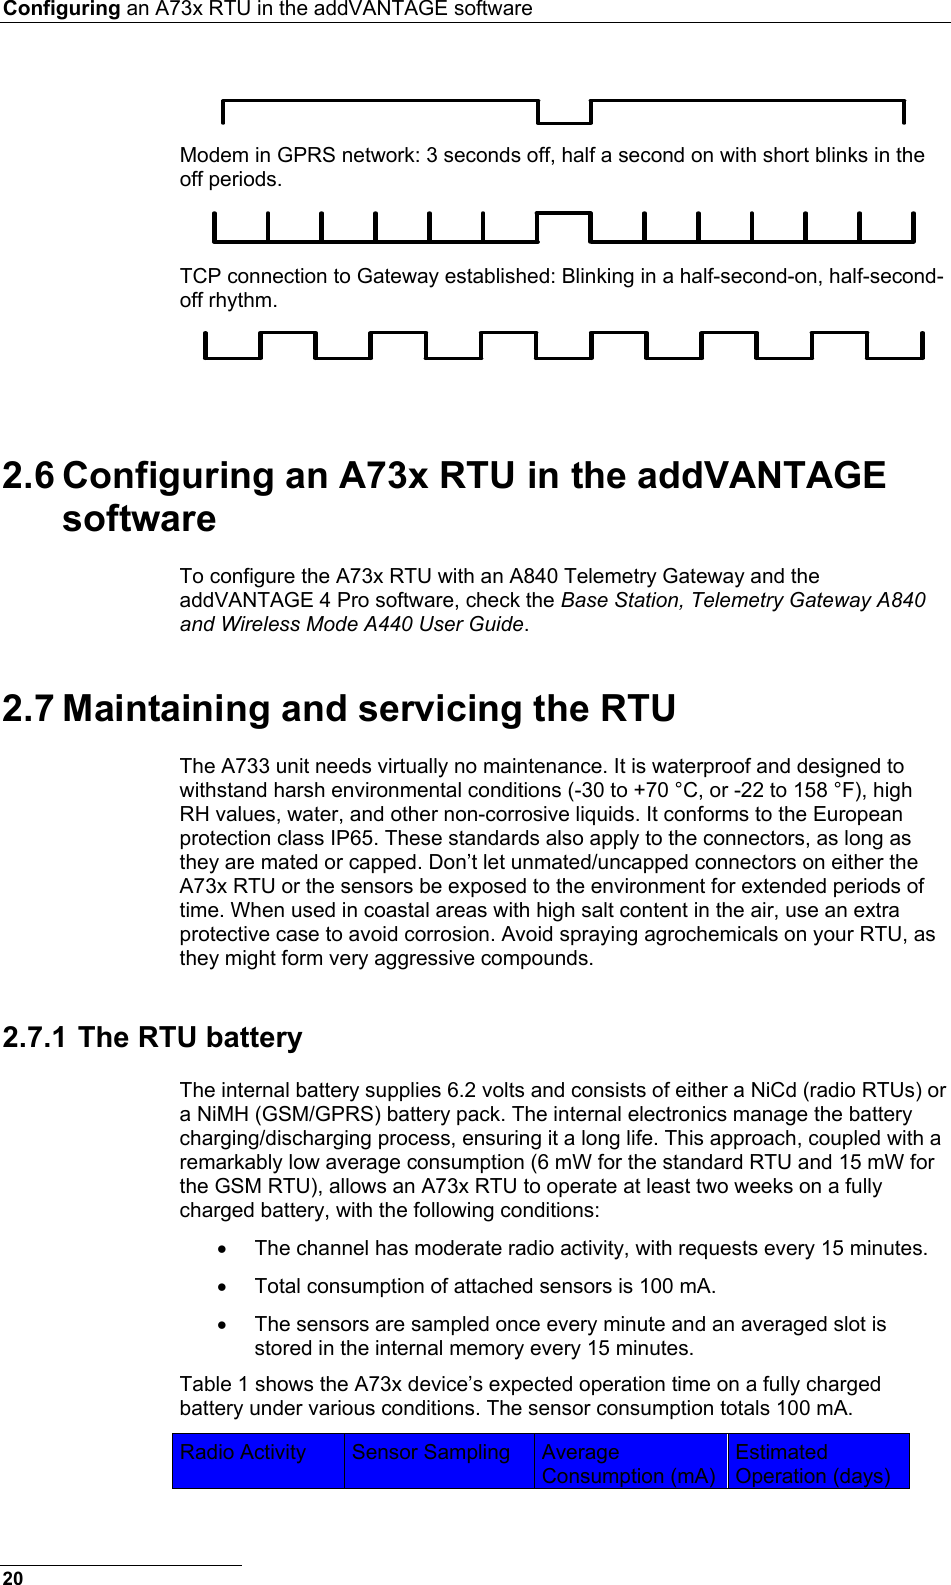 Configuring an A73x RTU in the addVANTAGE software   Modem in GPRS network: 3 seconds off, half a second on with short blinks in the off periods.  TCP connection to Gateway established: Blinking in a half-second-on, half-second-off rhythm.   2.6 Configuring an A73x RTU in the addVANTAGE software To configure the A73x RTU with an A840 Telemetry Gateway and the addVANTAGE 4 Pro software, check the Base Station, Telemetry Gateway A840 and Wireless Mode A440 User Guide. 2.7 Maintaining and servicing the RTU The A733 unit needs virtually no maintenance. It is waterproof and designed to withstand harsh environmental conditions (-30 to +70 °C, or -22 to 158 °F), high RH values, water, and other non-corrosive liquids. It conforms to the European protection class IP65. These standards also apply to the connectors, as long as they are mated or capped. Don’t let unmated/uncapped connectors on either the A73x RTU or the sensors be exposed to the environment for extended periods of time. When used in coastal areas with high salt content in the air, use an extra protective case to avoid corrosion. Avoid spraying agrochemicals on your RTU, as they might form very aggressive compounds. 2.7.1 The RTU battery The internal battery supplies 6.2 volts and consists of either a NiCd (radio RTUs) or a NiMH (GSM/GPRS) battery pack. The internal electronics manage the battery charging/discharging process, ensuring it a long life. This approach, coupled with a remarkably low average consumption (6 mW for the standard RTU and 15 mW for the GSM RTU), allows an A73x RTU to operate at least two weeks on a fully charged battery, with the following conditions: •  The channel has moderate radio activity, with requests every 15 minutes. •  Total consumption of attached sensors is 100 mA. •  The sensors are sampled once every minute and an averaged slot is stored in the internal memory every 15 minutes. Table 1 shows the A73x device’s expected operation time on a fully charged battery under various conditions. The sensor consumption totals 100 mA. Radio Activity  Sensor Sampling  Average Consumption (mA) Estimated Operation (days) 20 